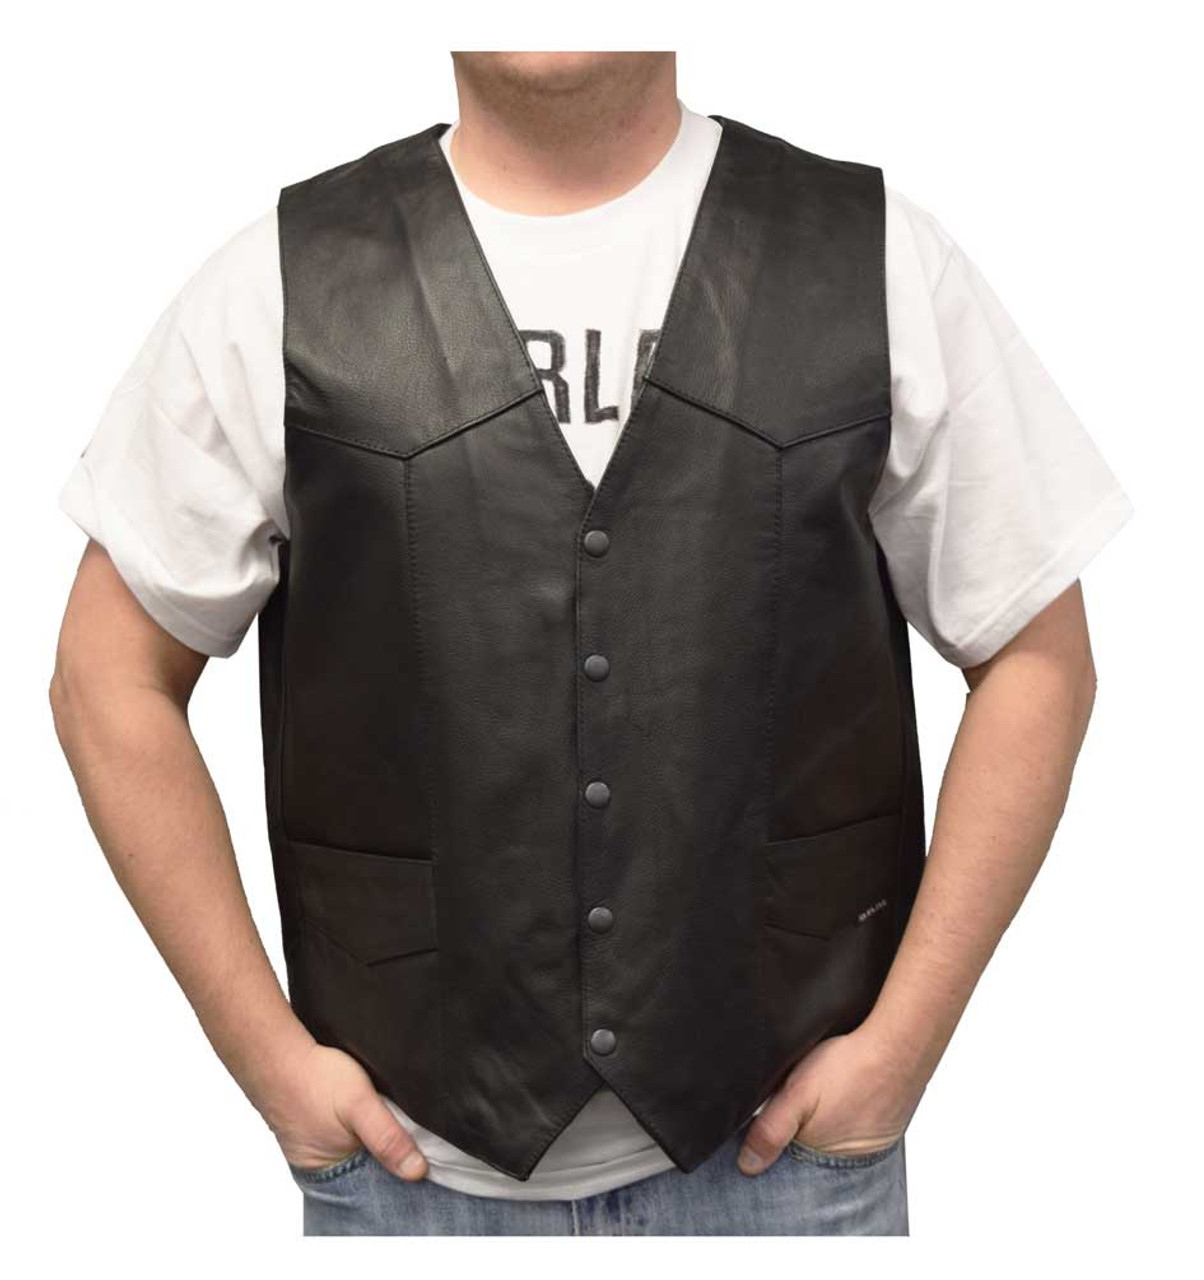 PU Leather Motorcycle Vest for Men Classic Vintage Riding Biker Vests Cut  Off Button Down Sleeveless Jacket with Pockets Black at  Men's  Clothing store